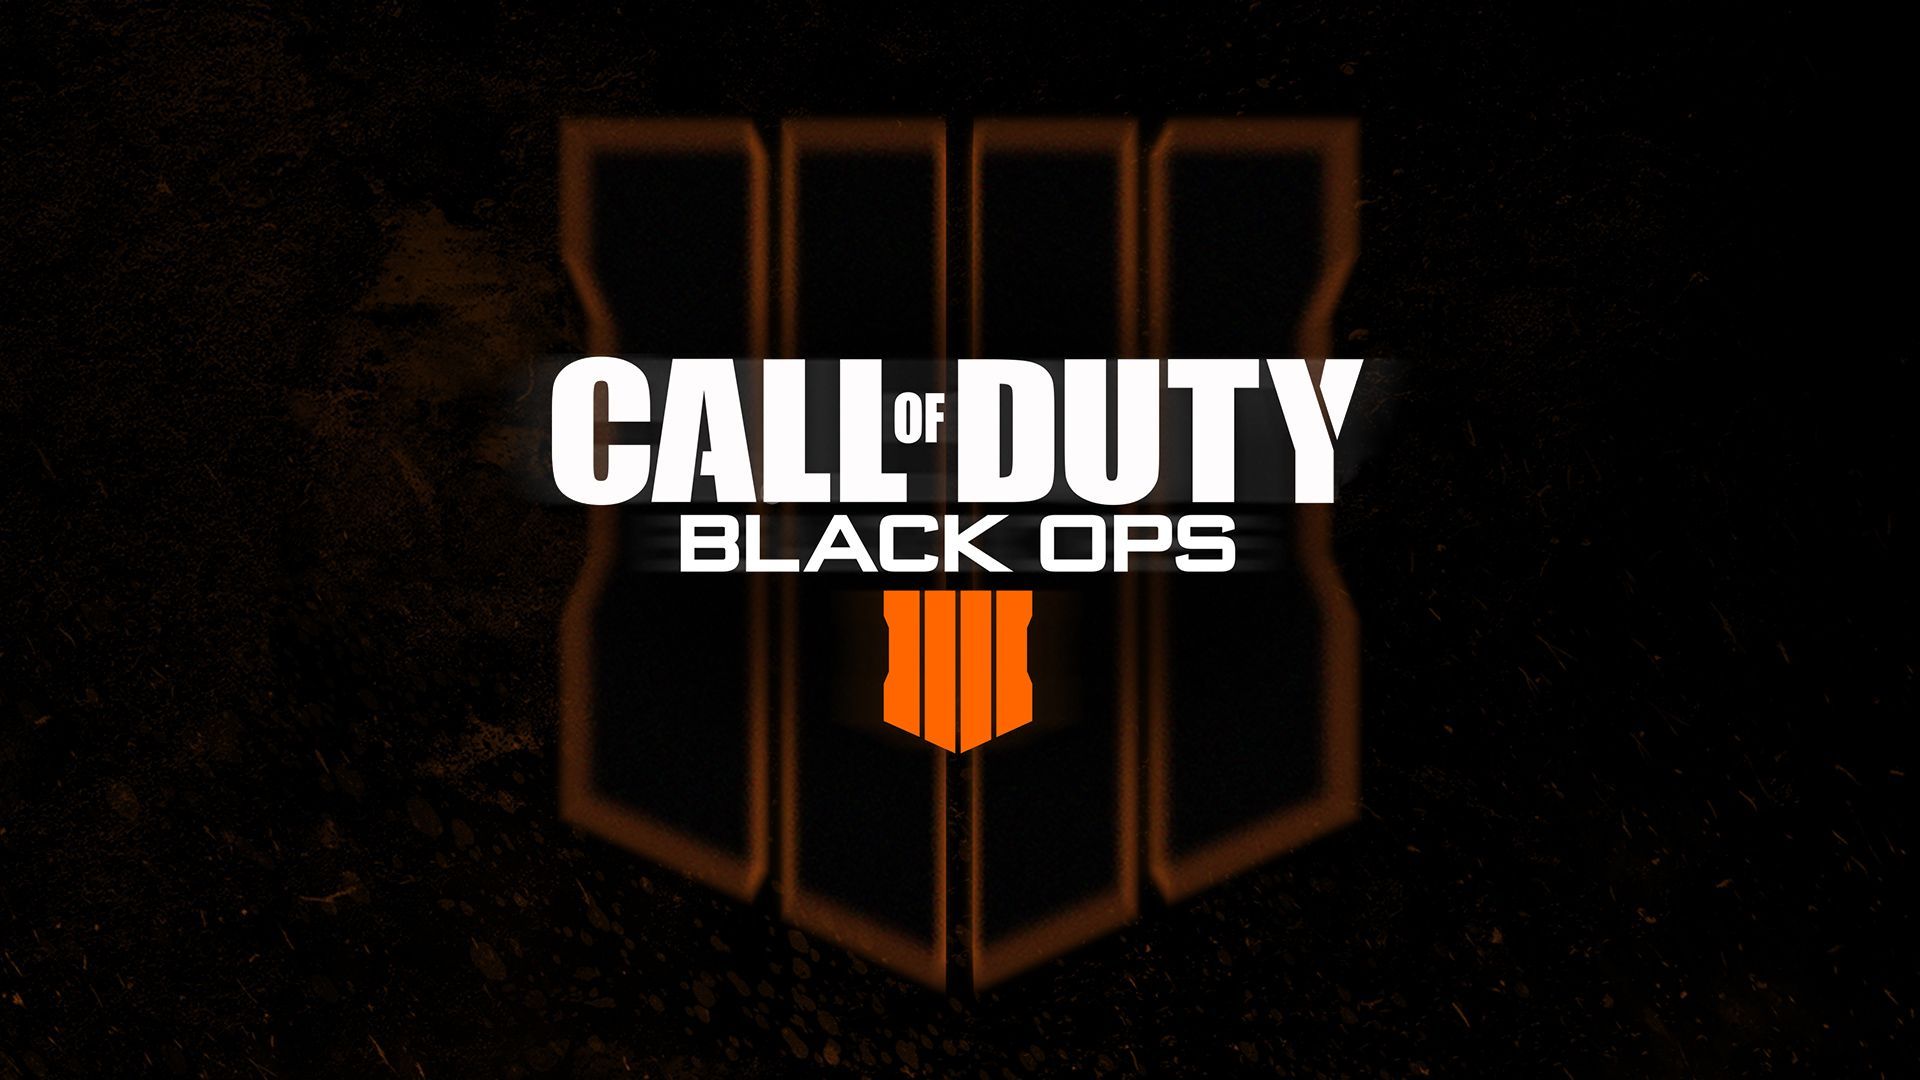 Call of Duty Black Ops 4 Wallpaper Free Call of Duty Black Ops 4 Background